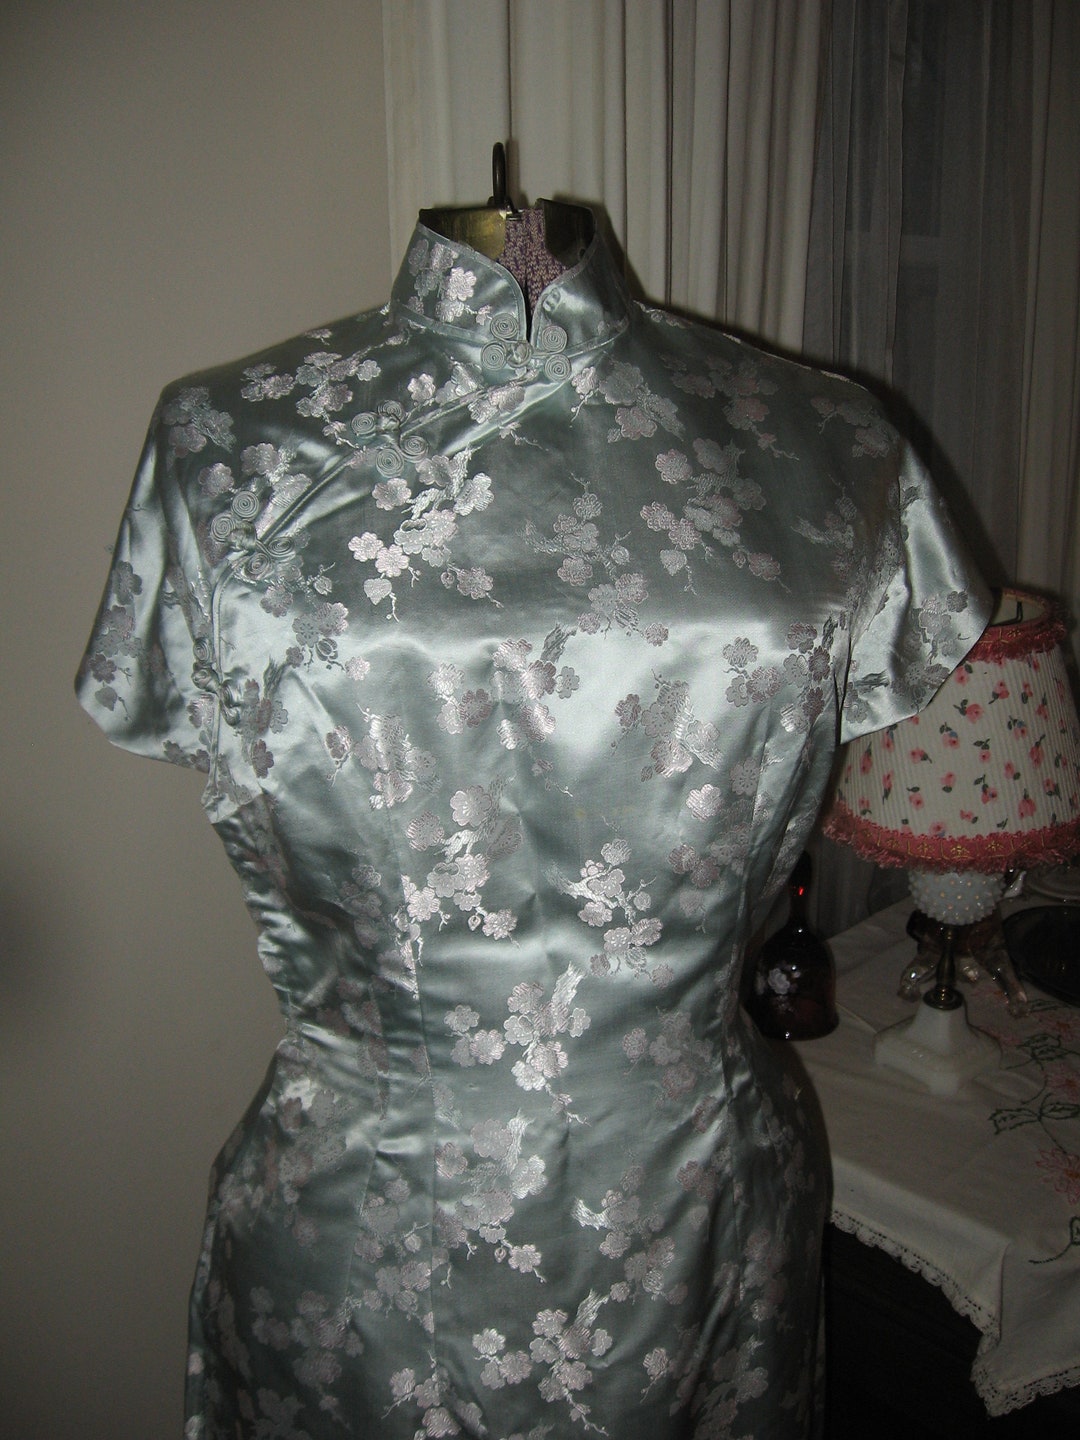 Oriental Style Dress Pale Blue Satin With Floral Design - Etsy